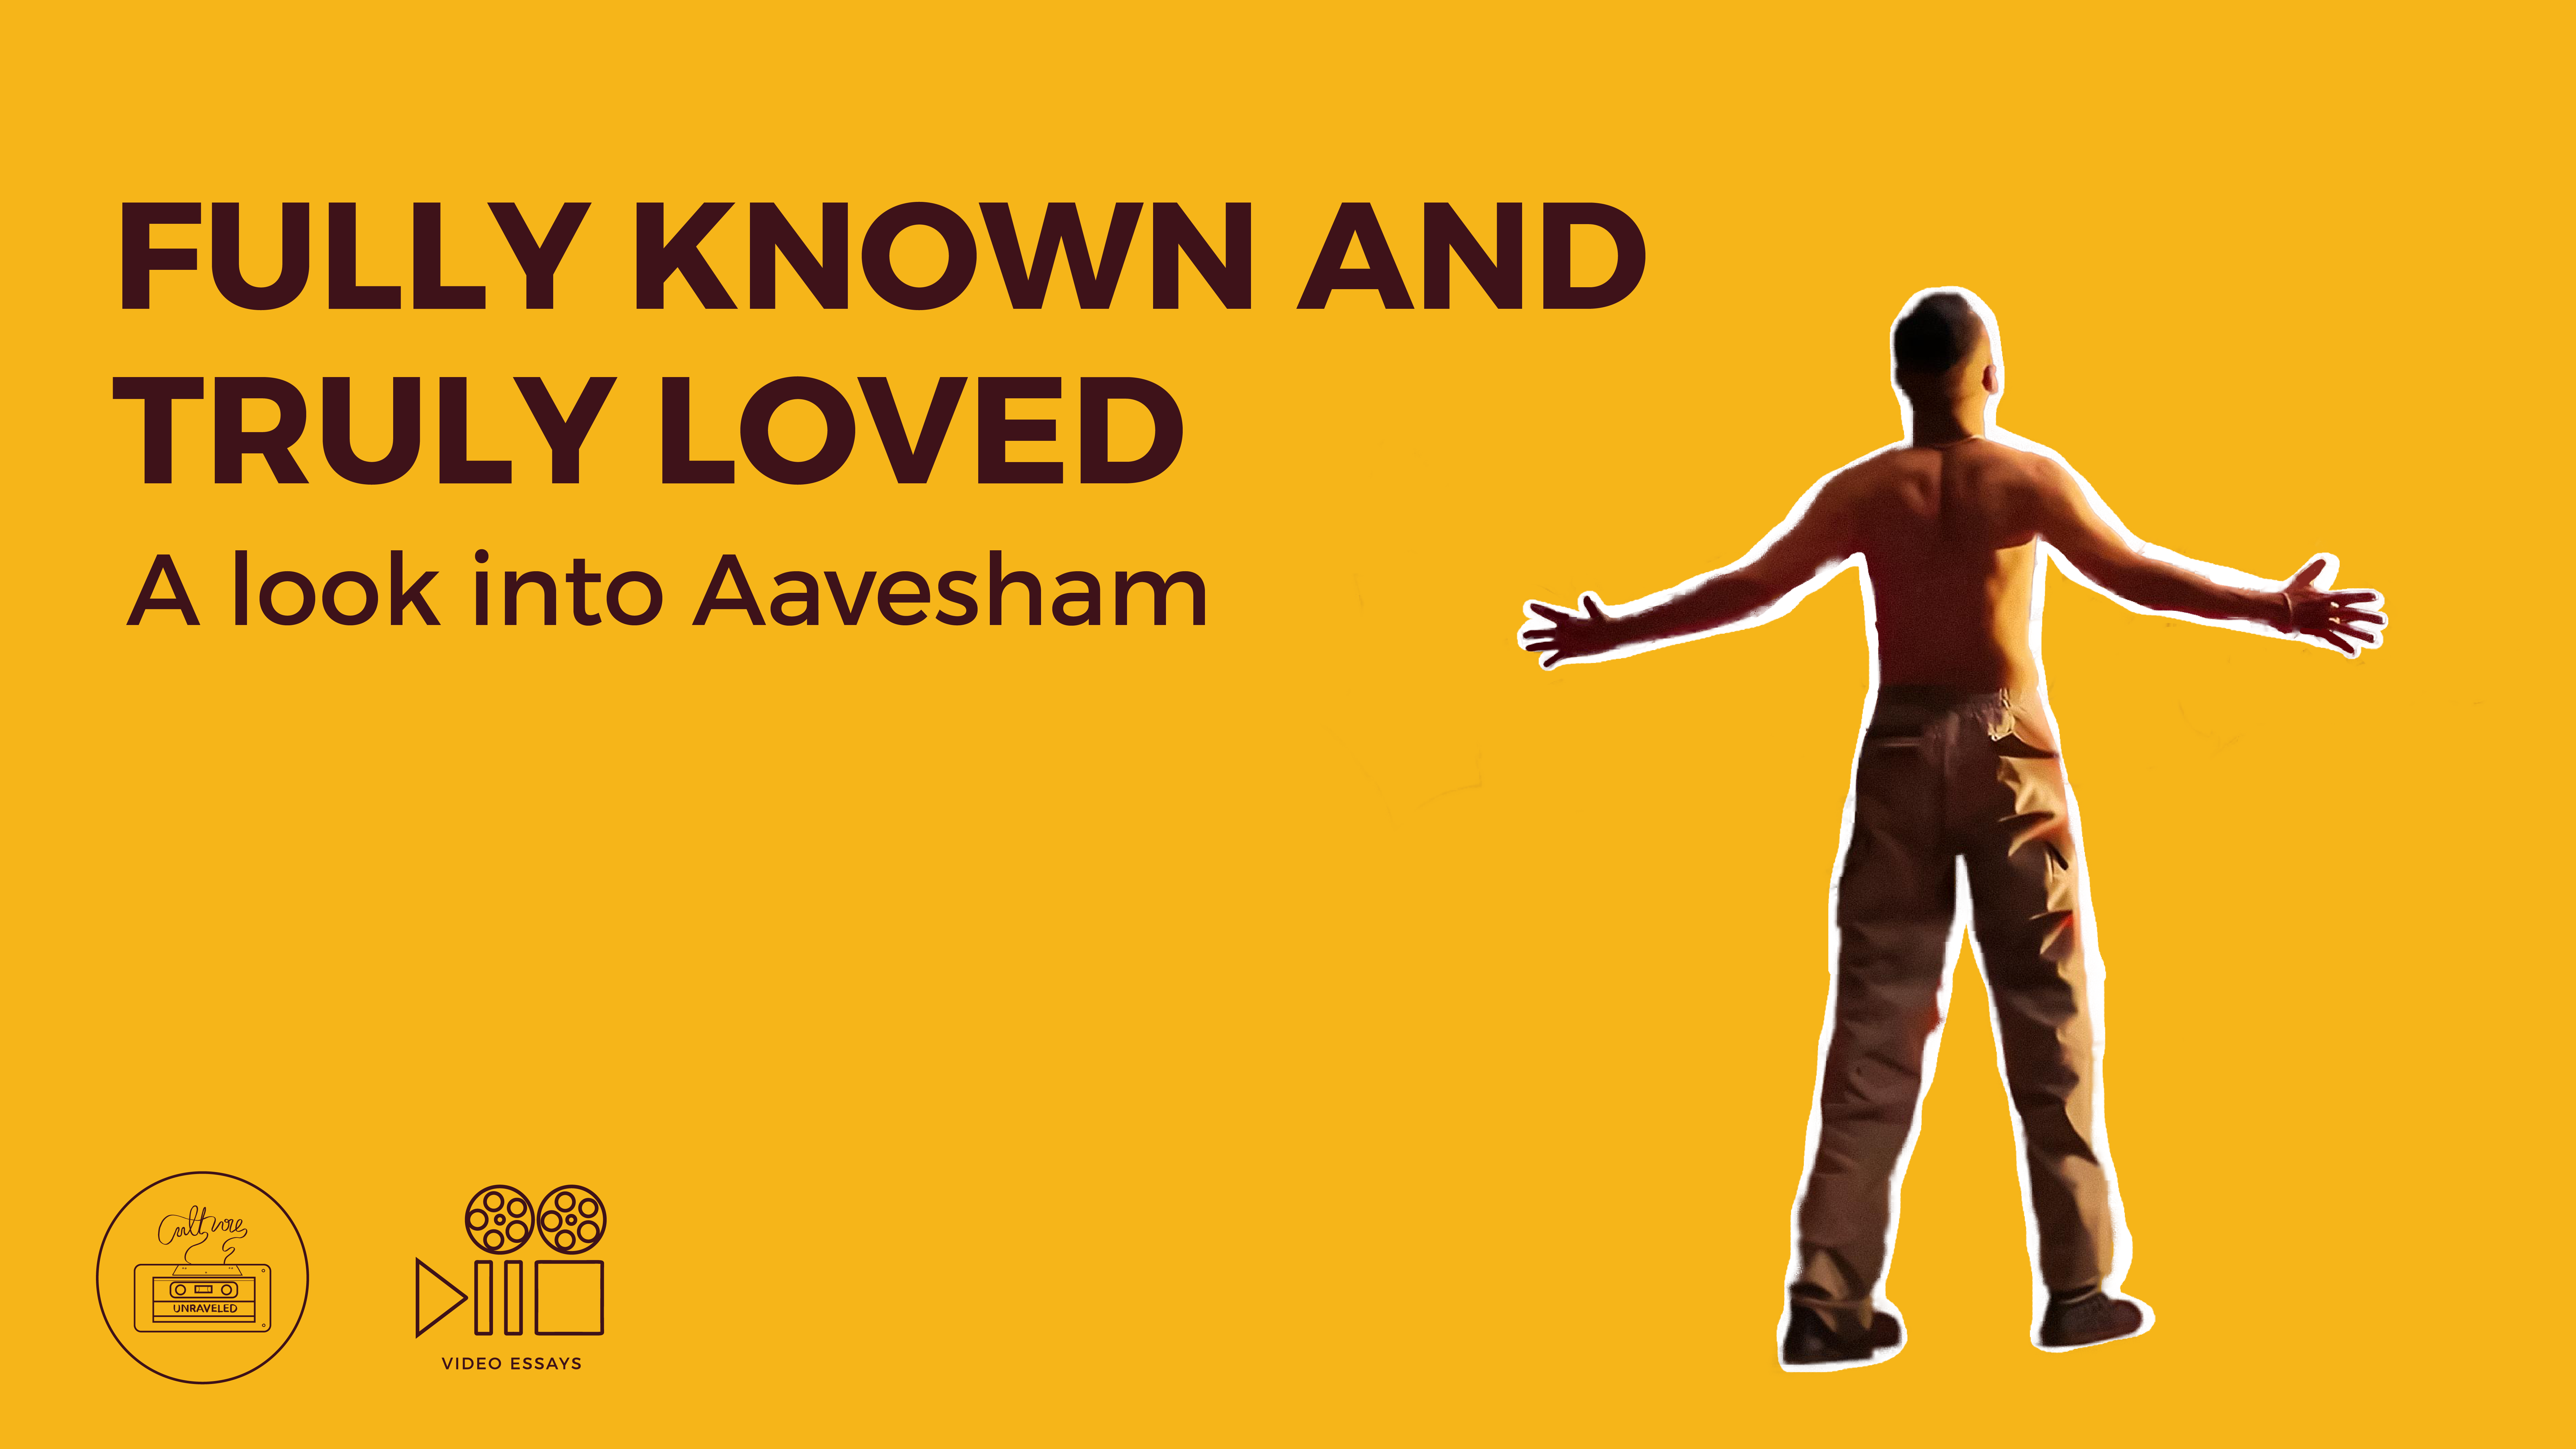 Fully Known and Truly Loved. A look into Aavesham